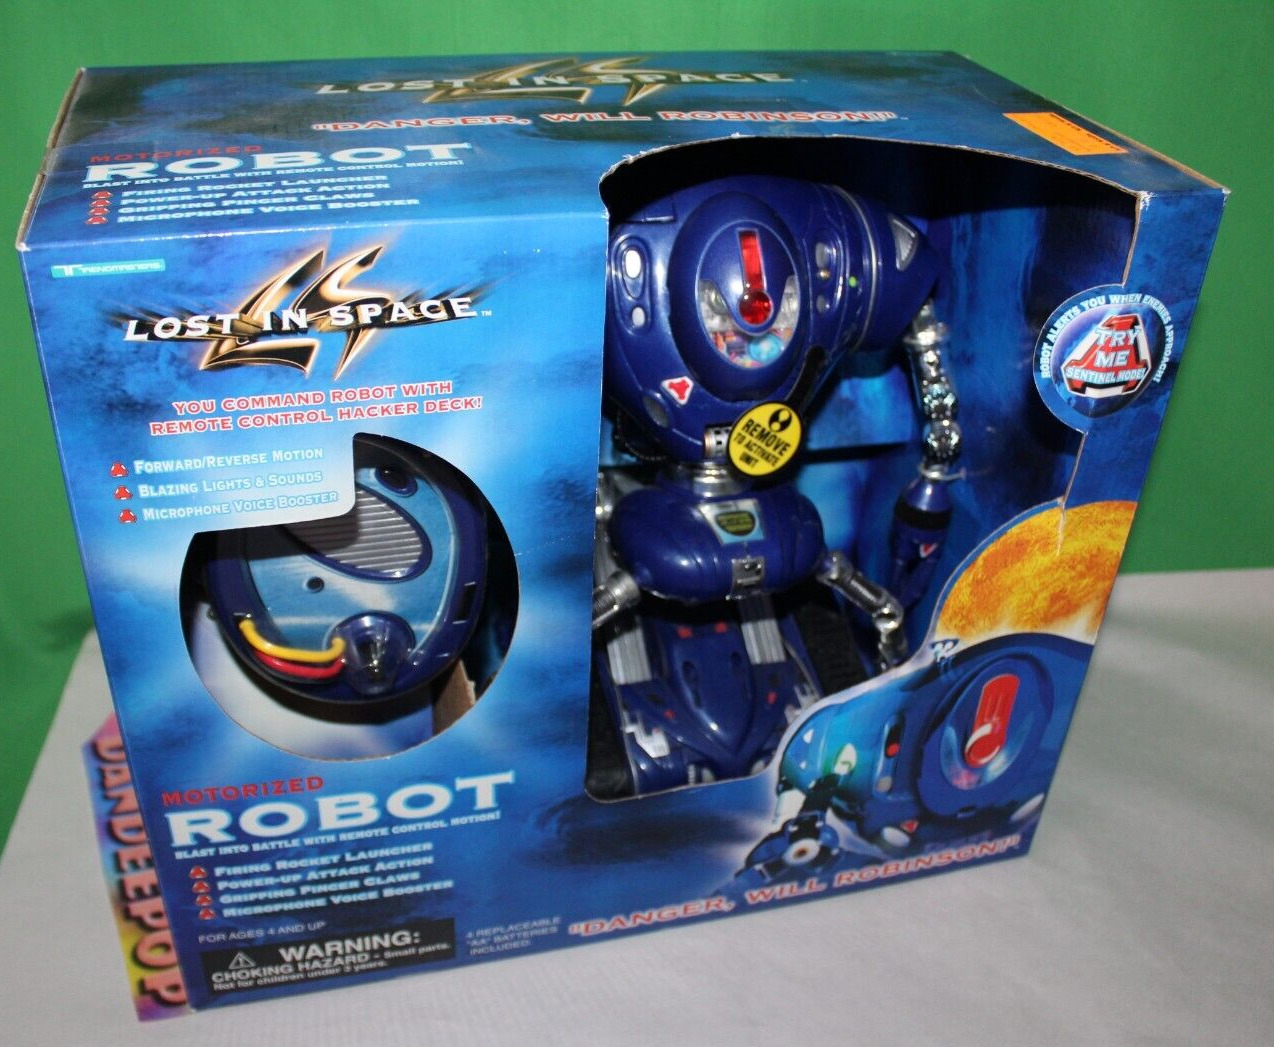 Lost In Space RC Remote Control Robot 31192 Trendmasters 1997 Toy Danger Will